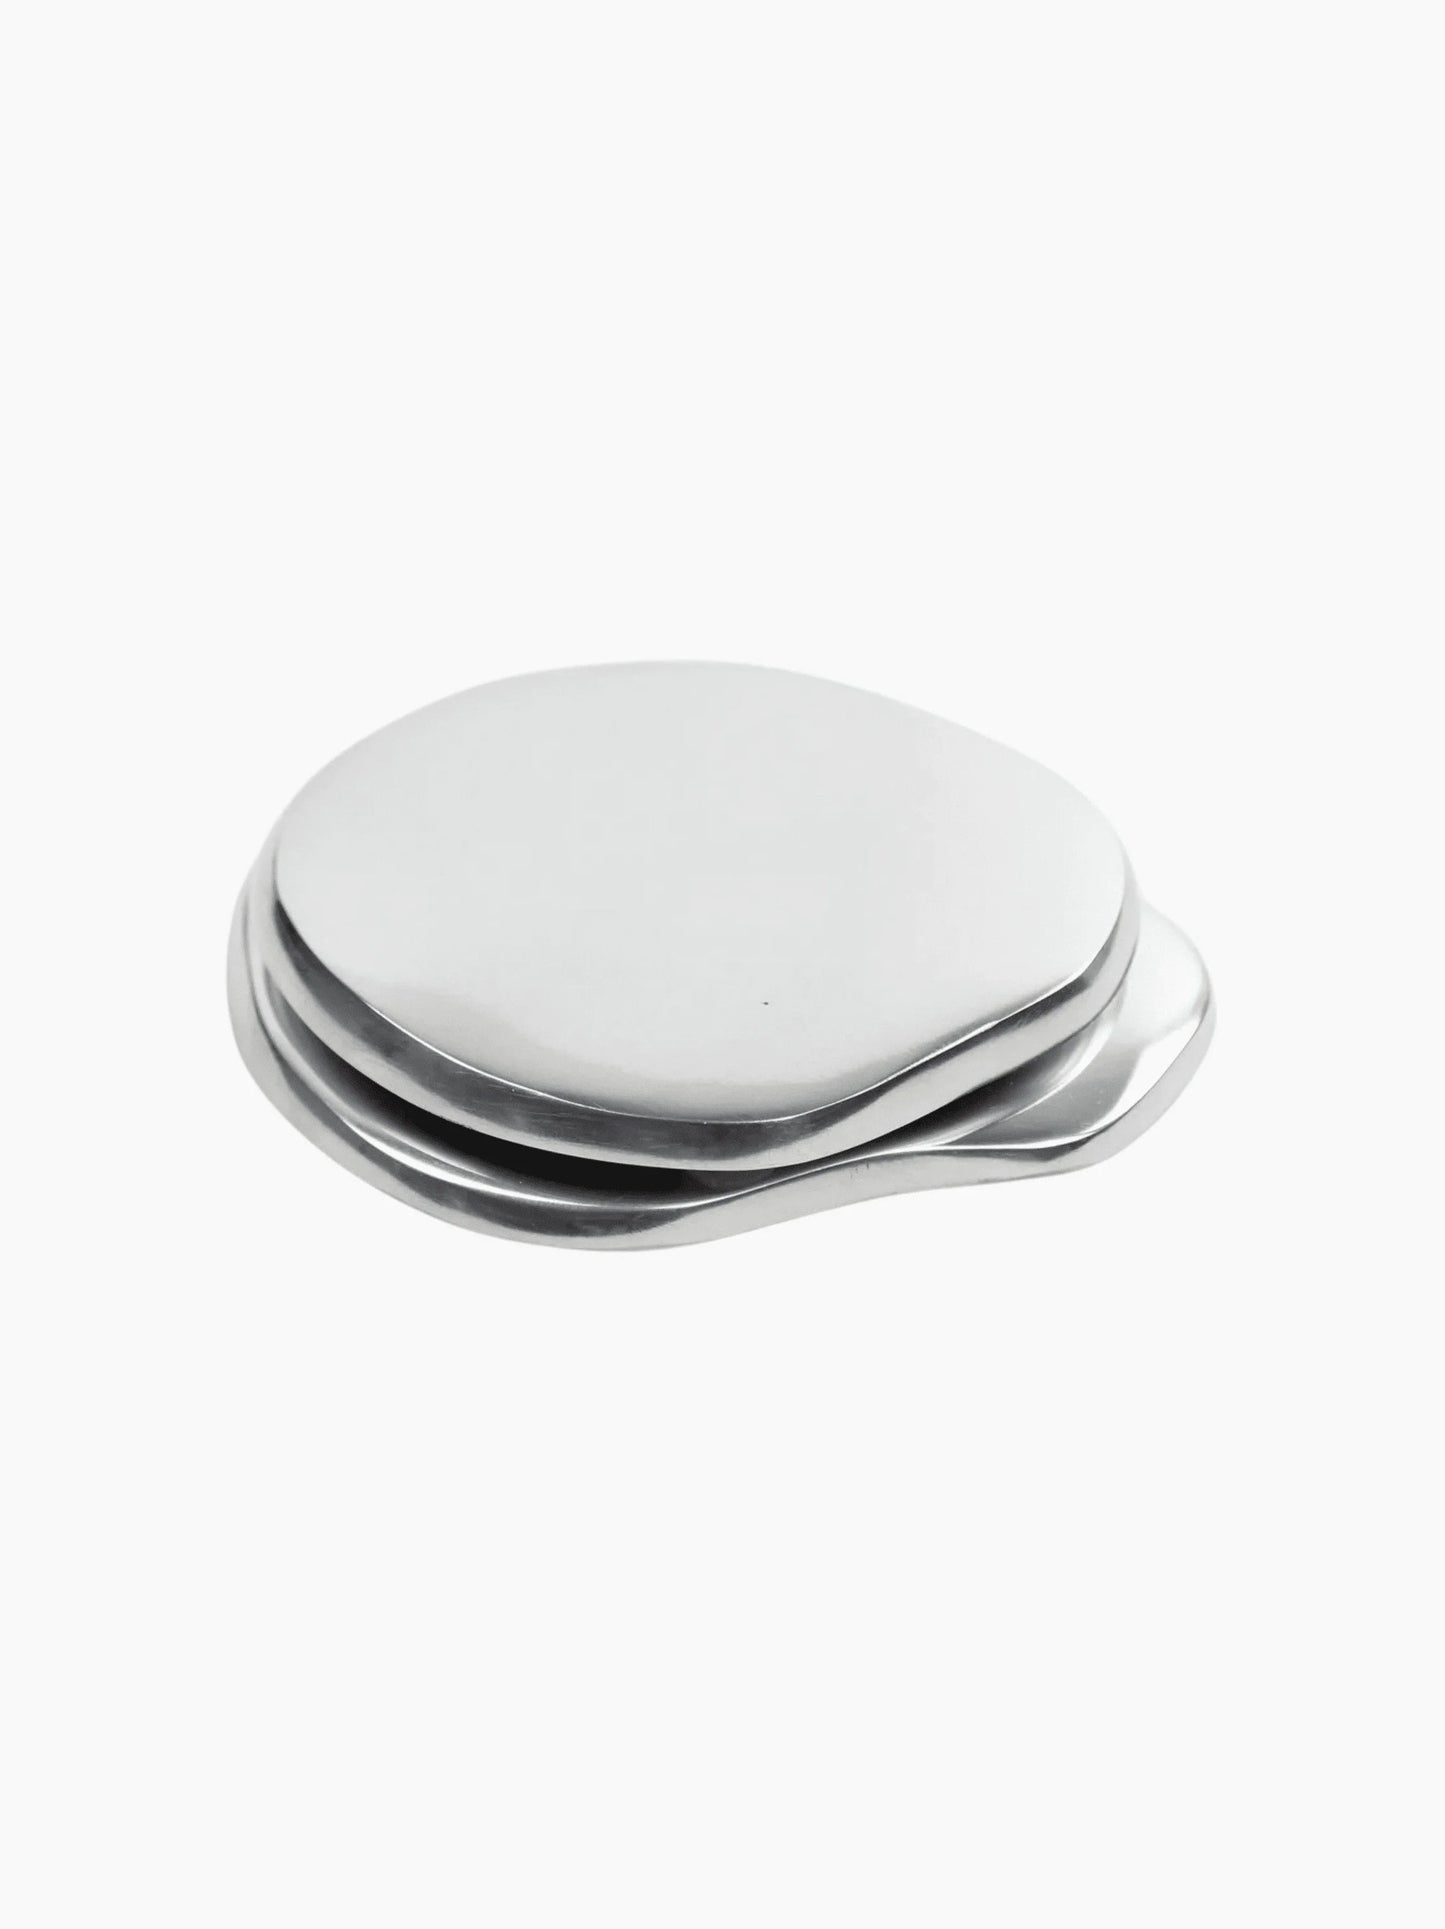 Silver Cocktail Coasters